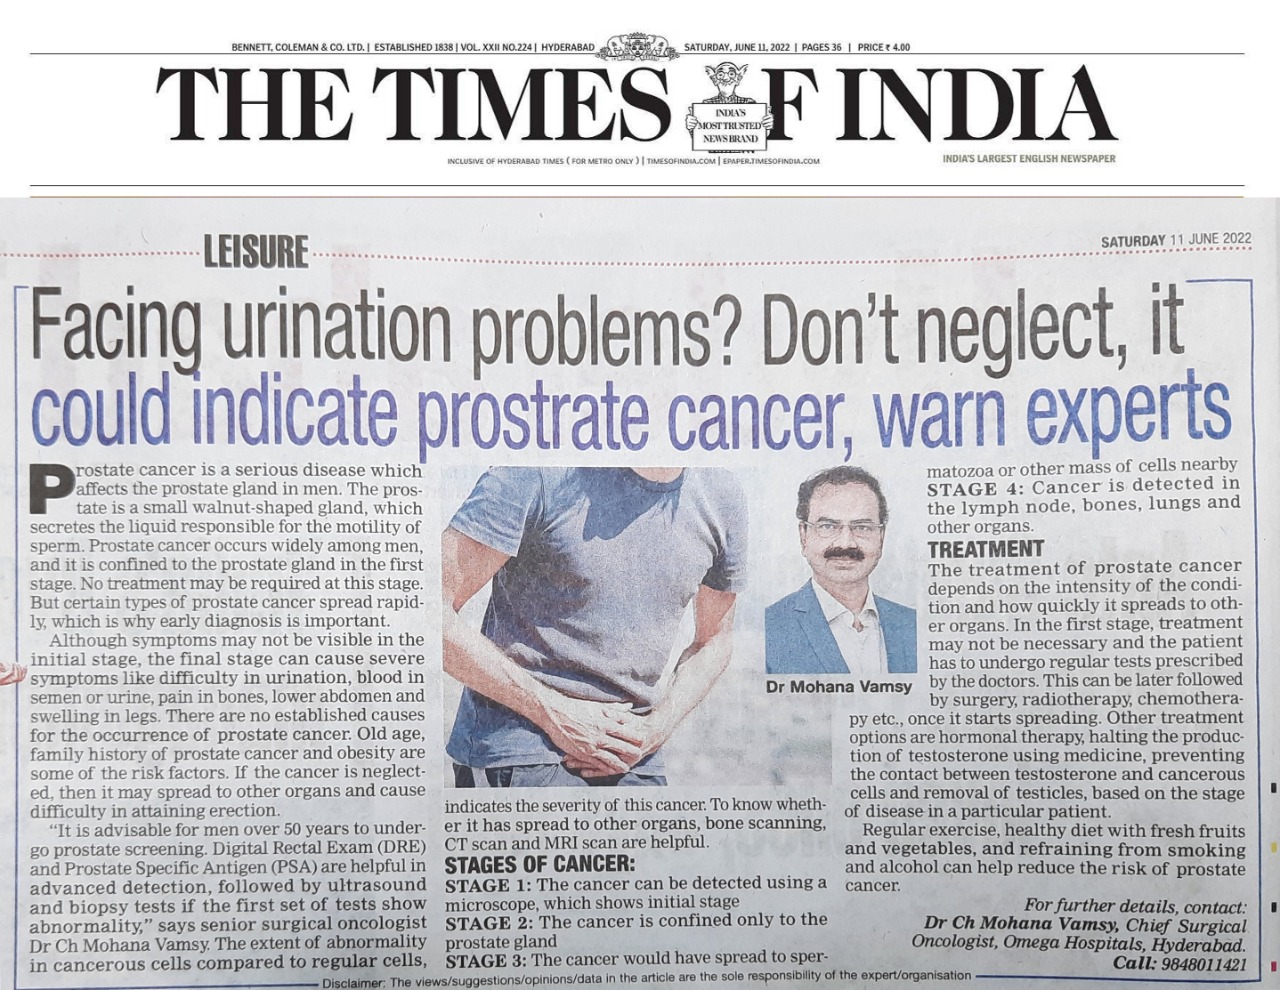 Facing urination problems? Don't neglect it could indicate prostate cancer